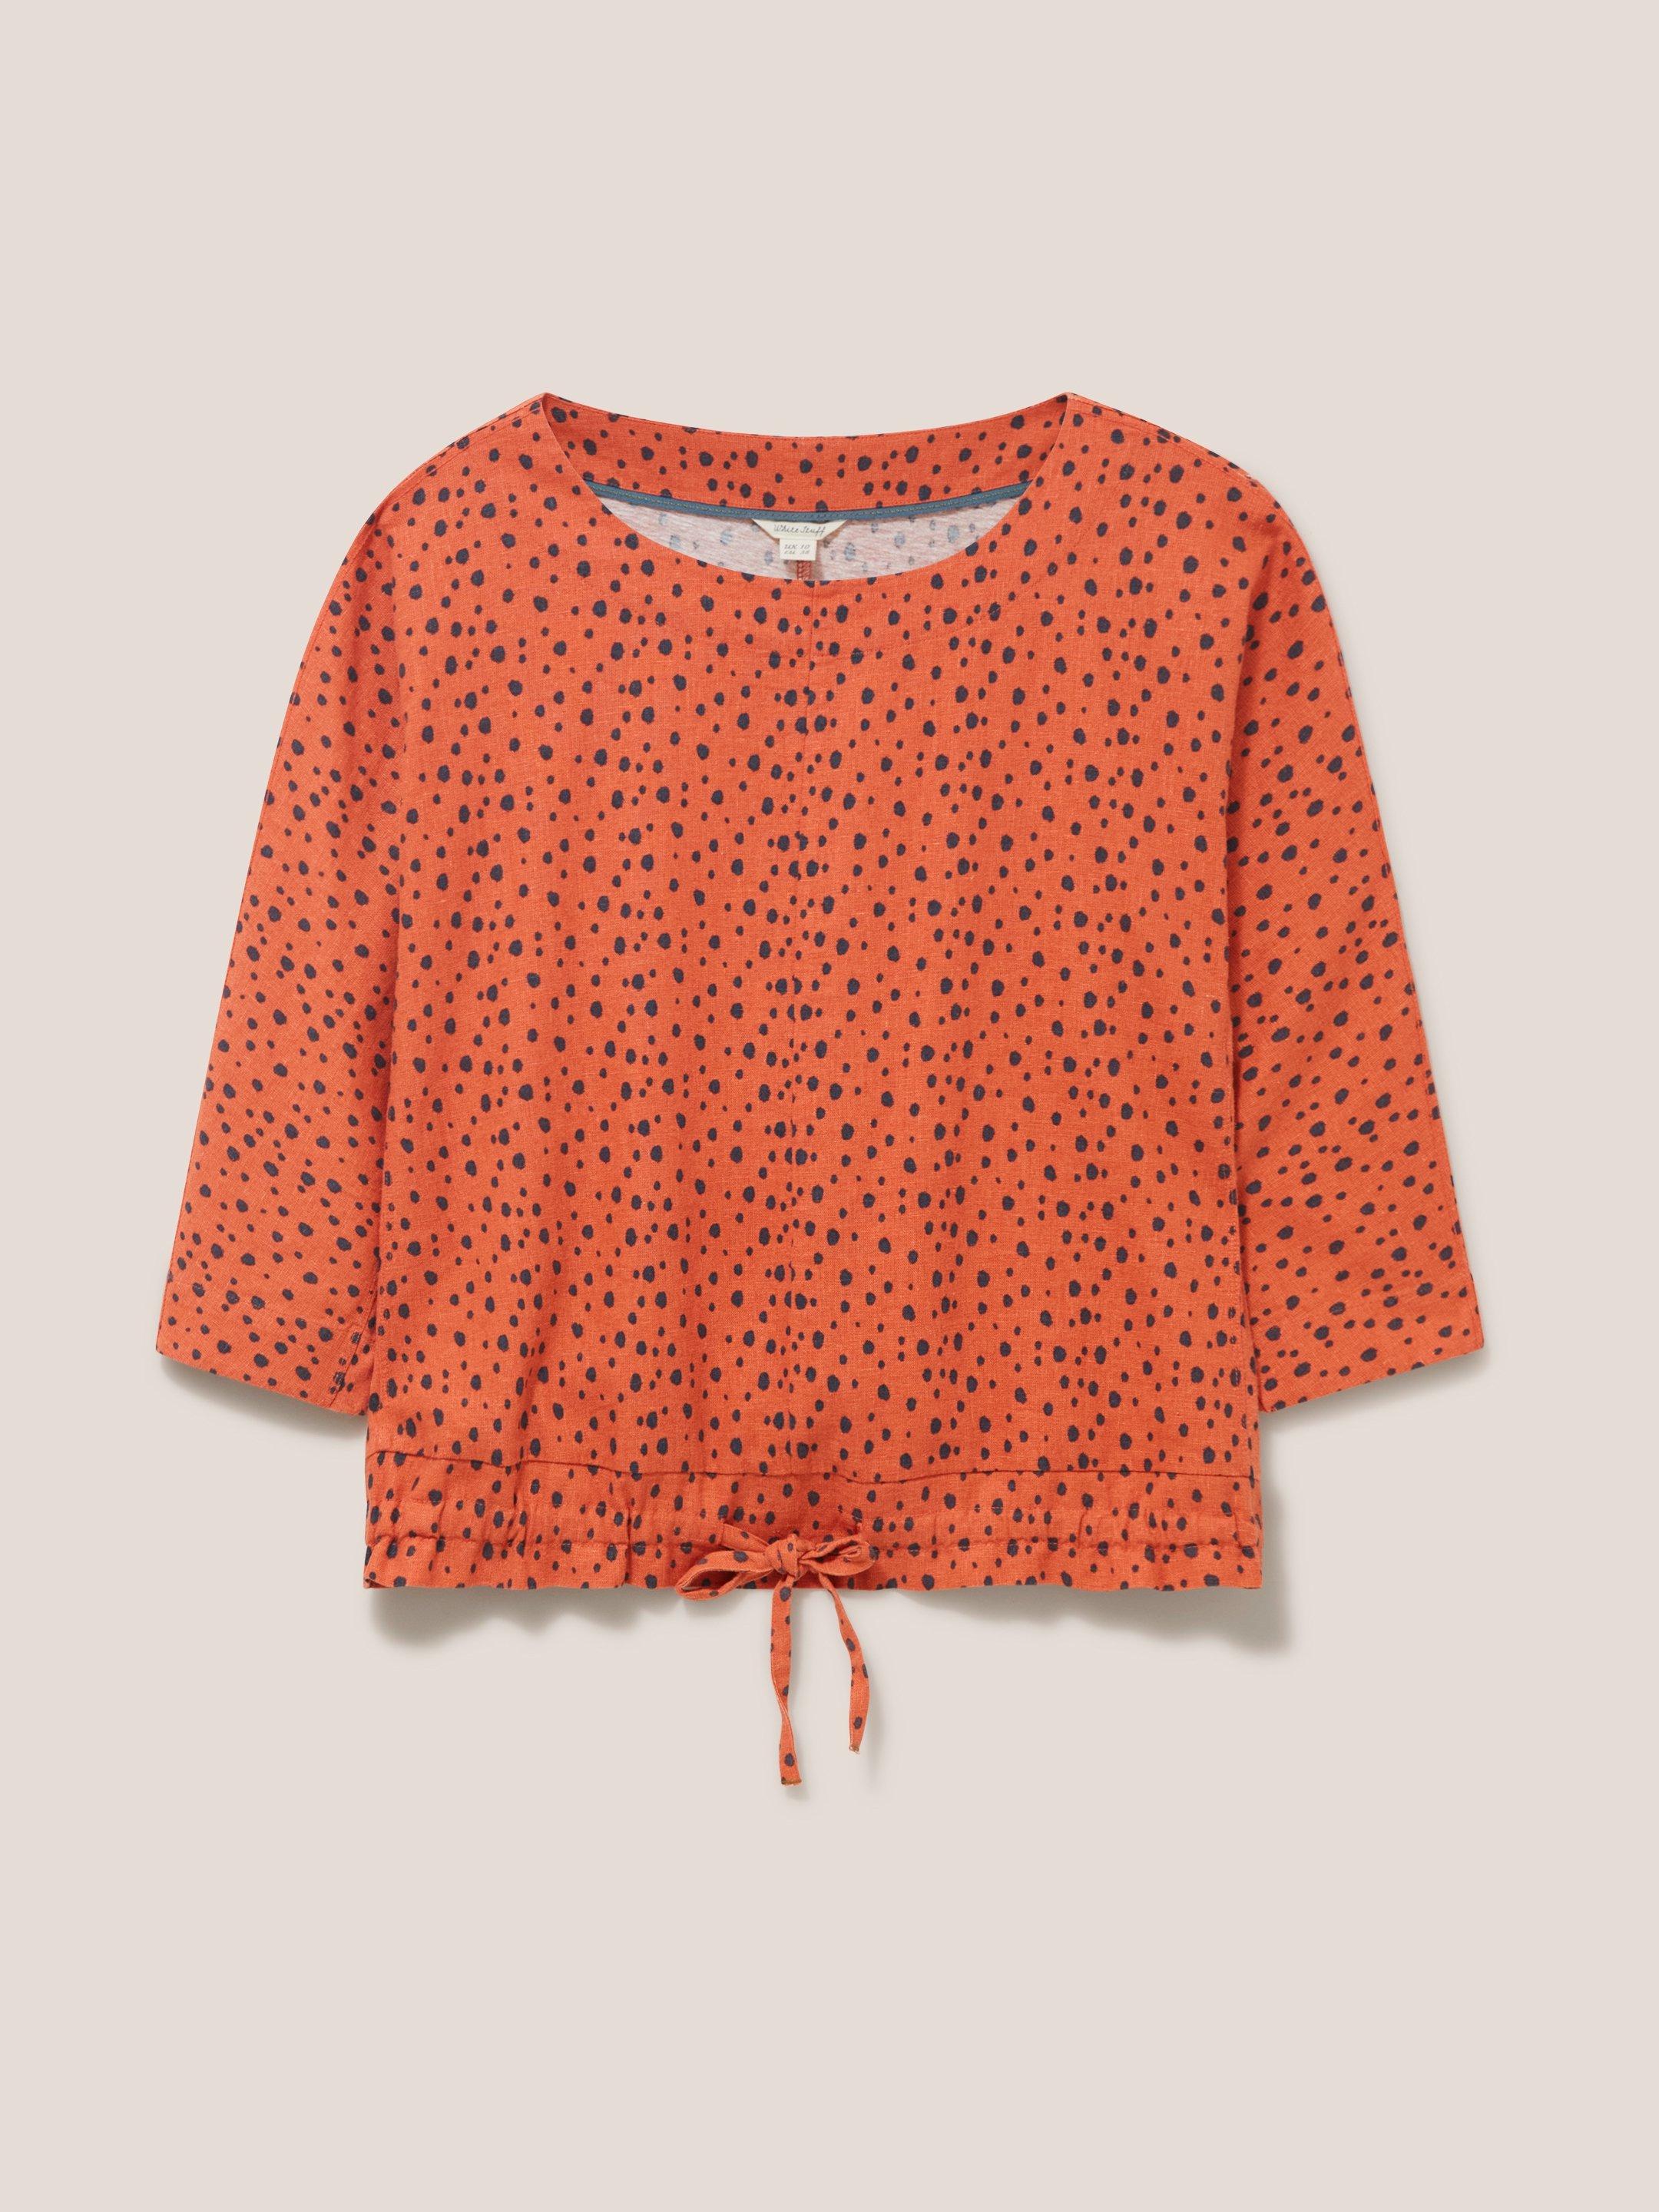 MADDIE MIX TOP in CORAL MLT - FLAT FRONT